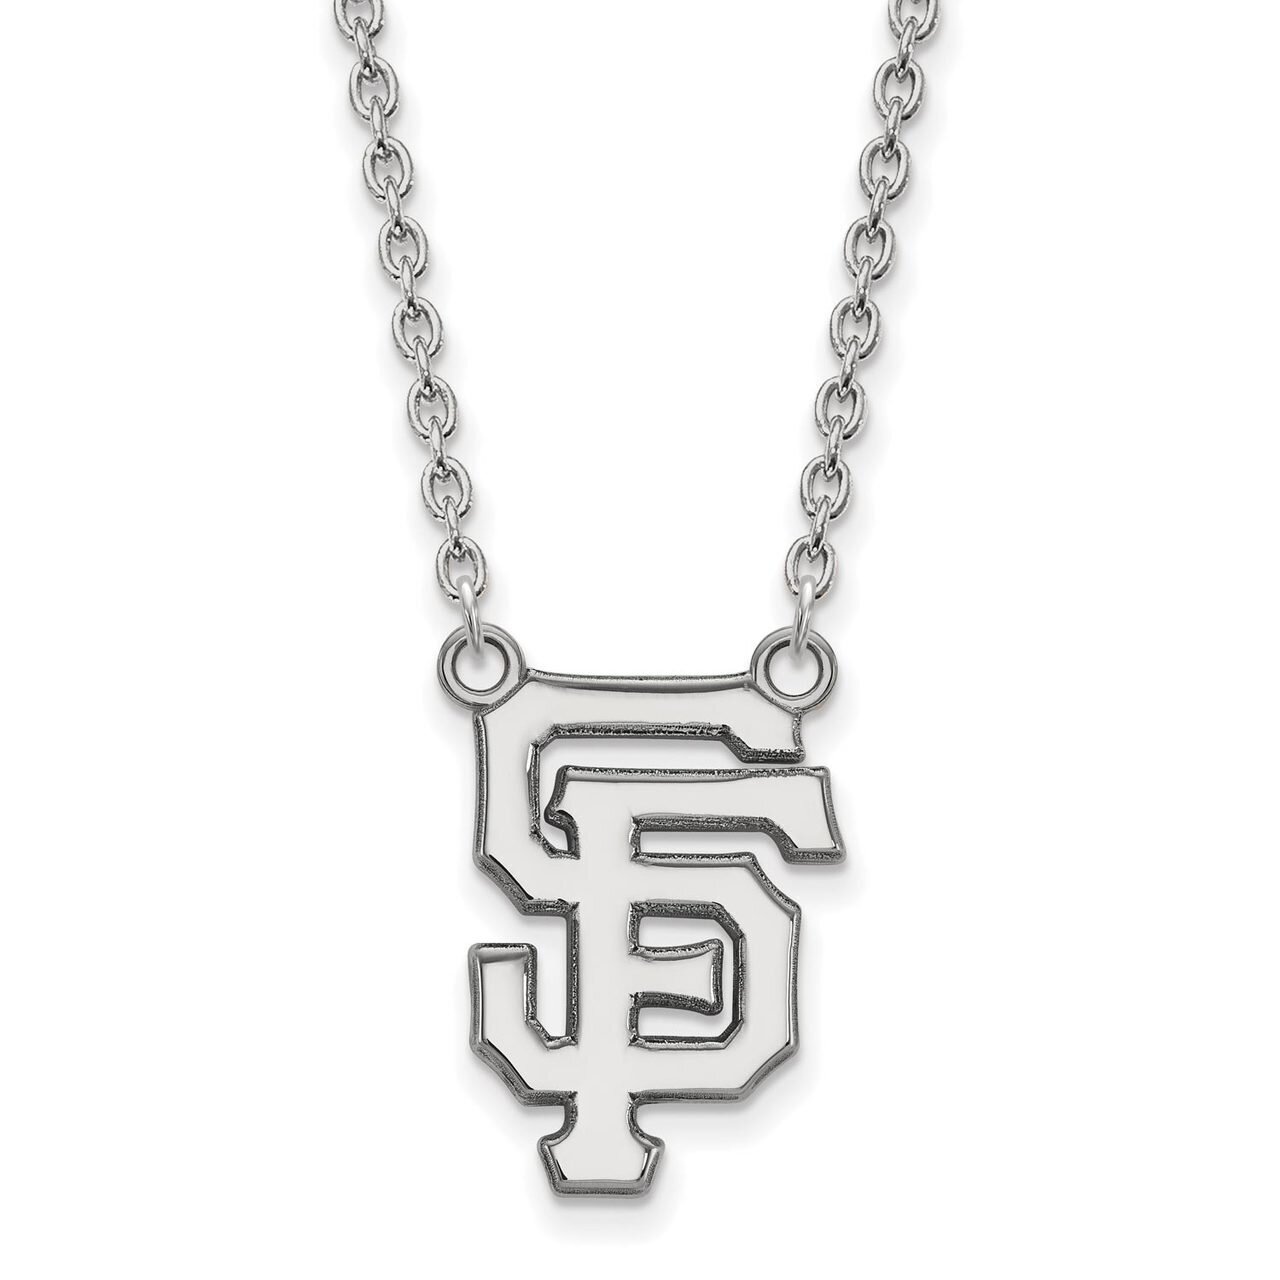 San Francisco Giants Large Pendant with Chain Necklace 14k White Gold 4W015GIT-18